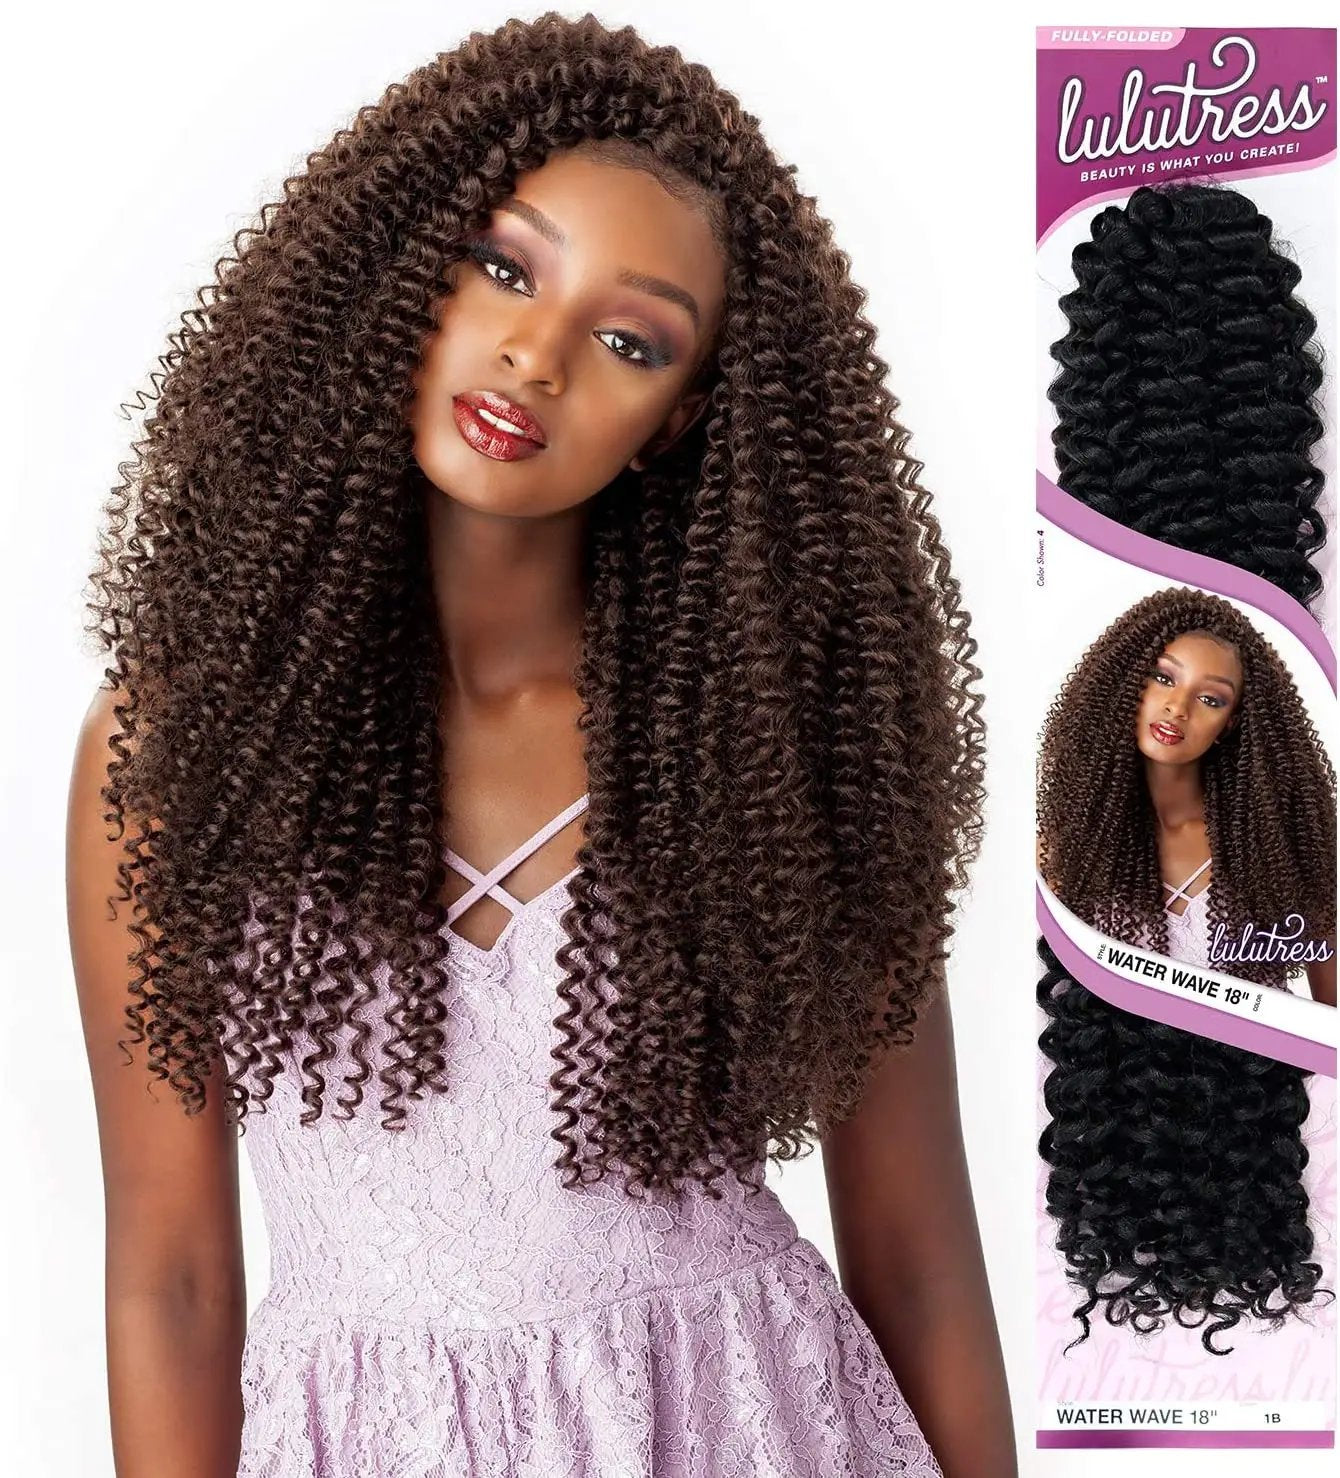 An image of a girl with curly hair beside an image of a pack of the lulutress water wave